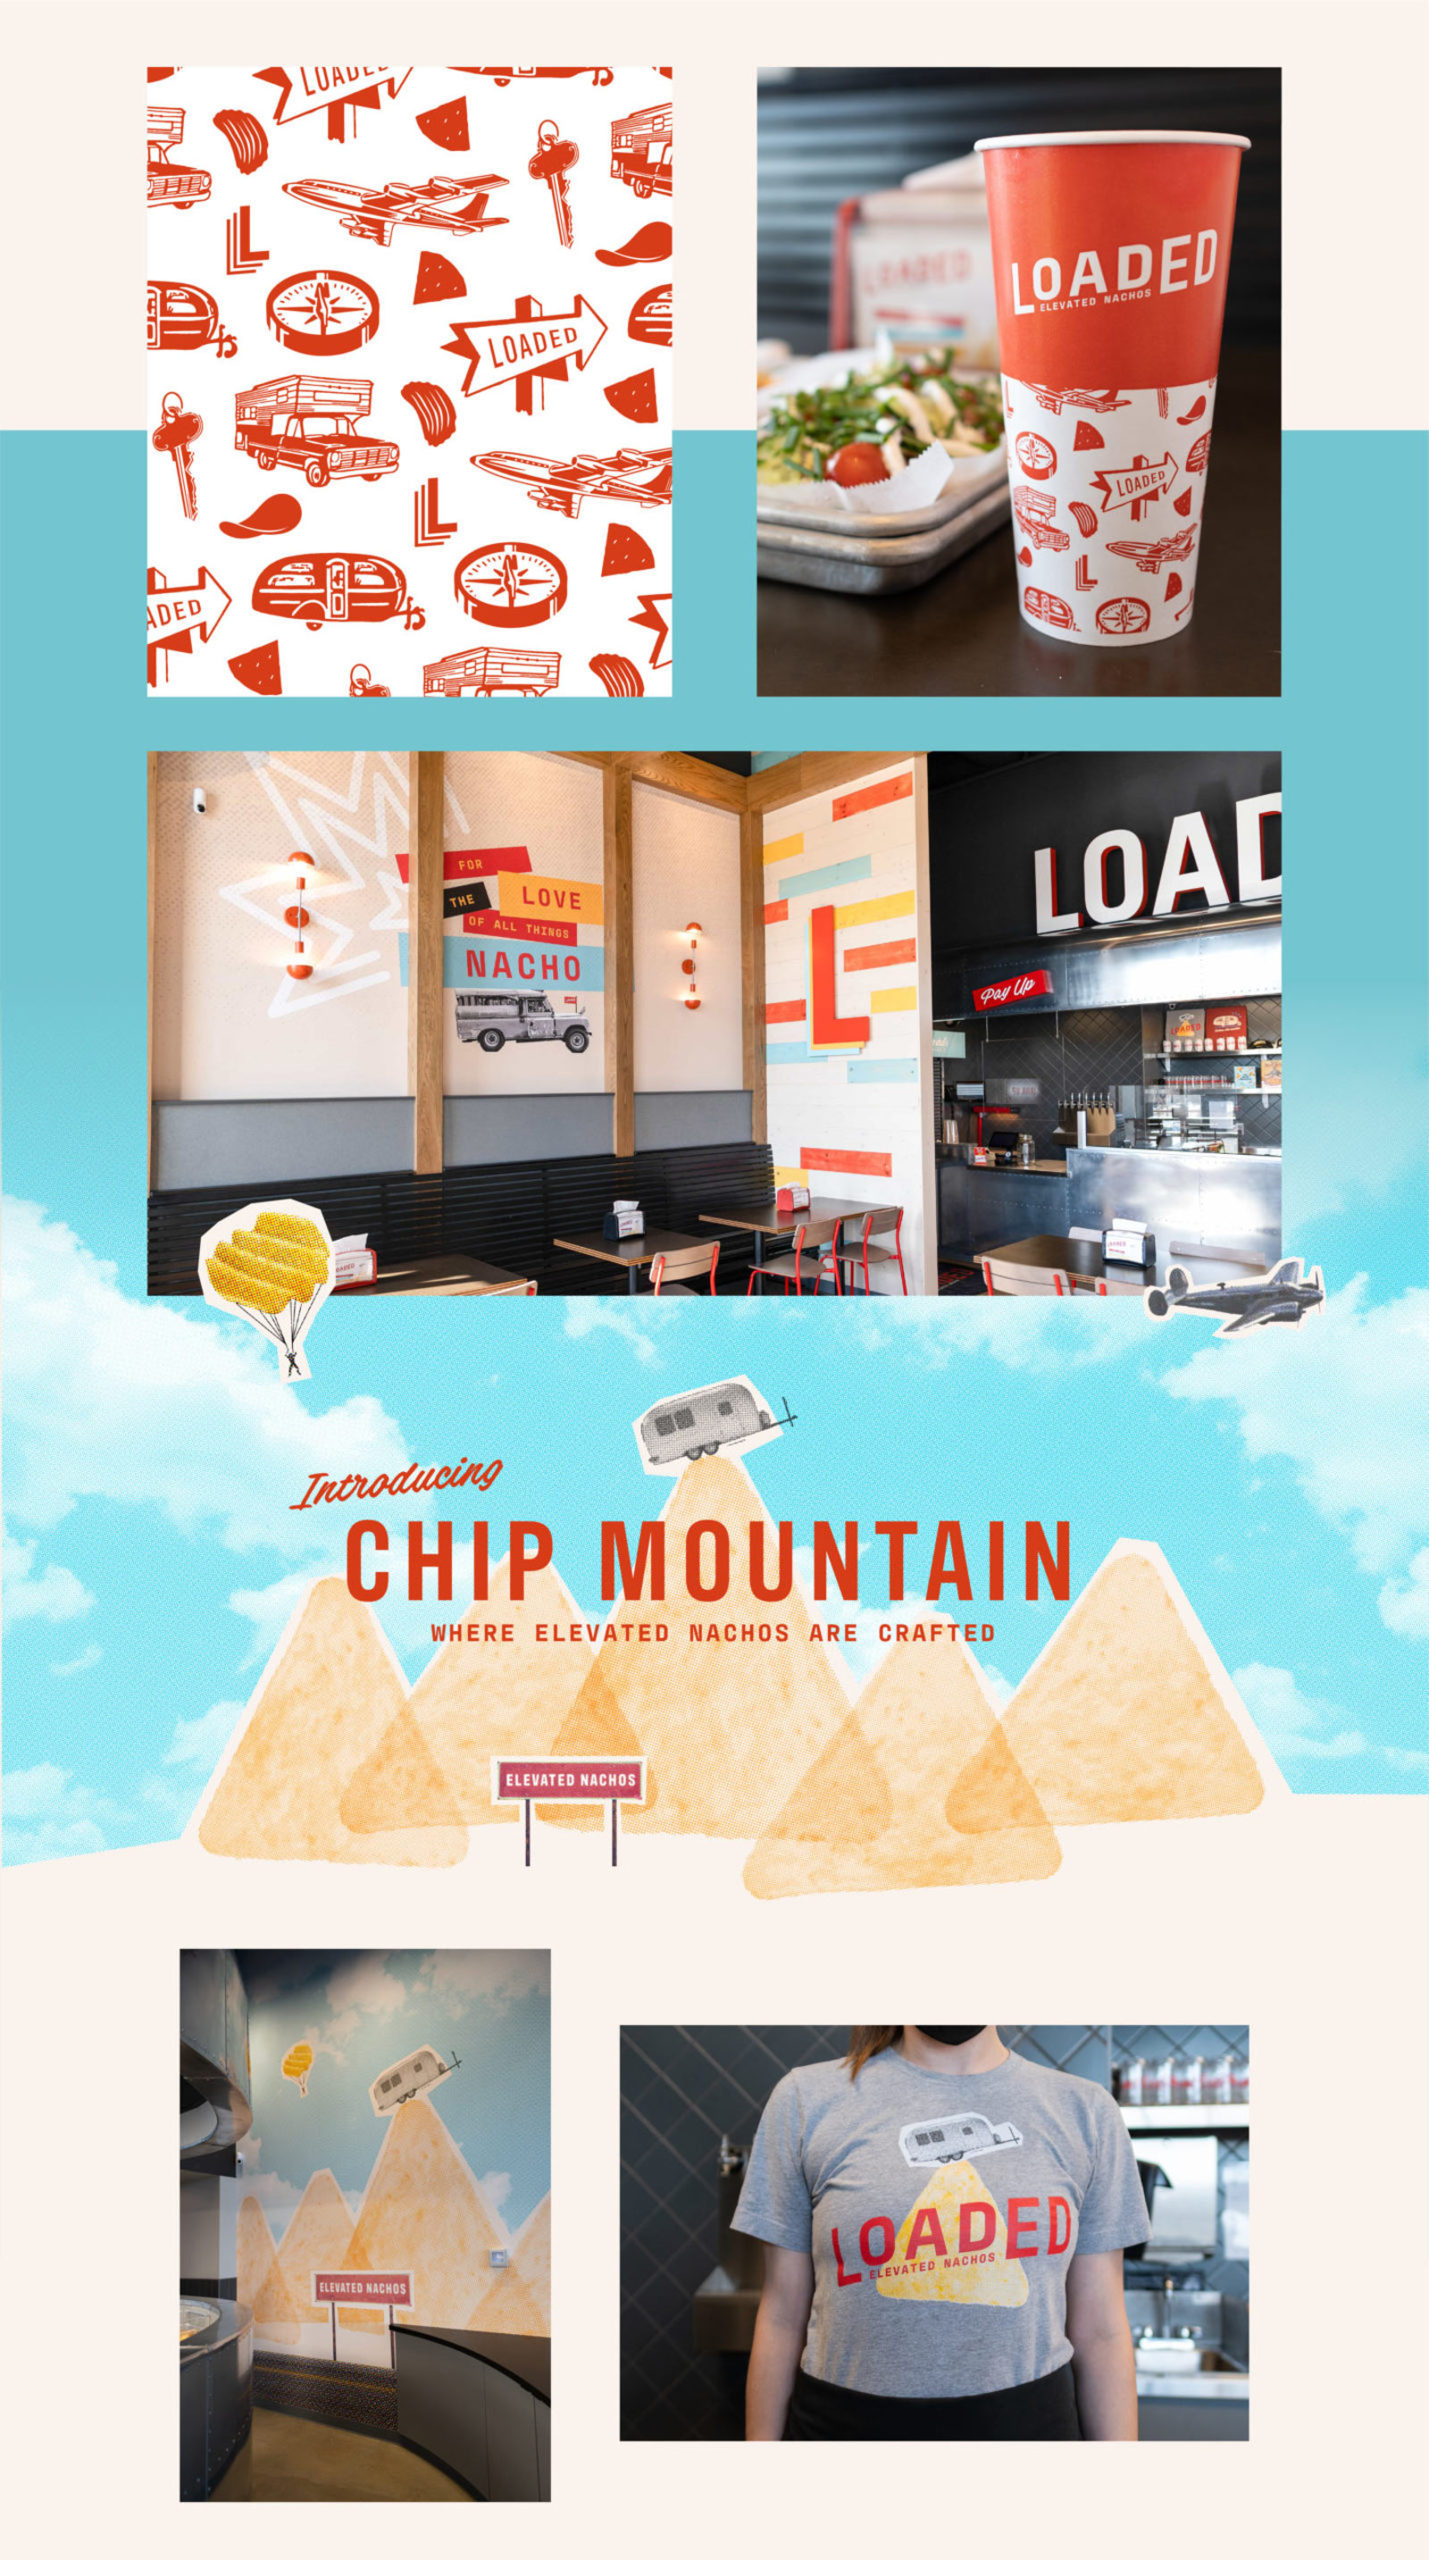 Expressions of Loaded's brand identity, including paper cups, a brand pattern, chip mountain illustration and staff t-shirts